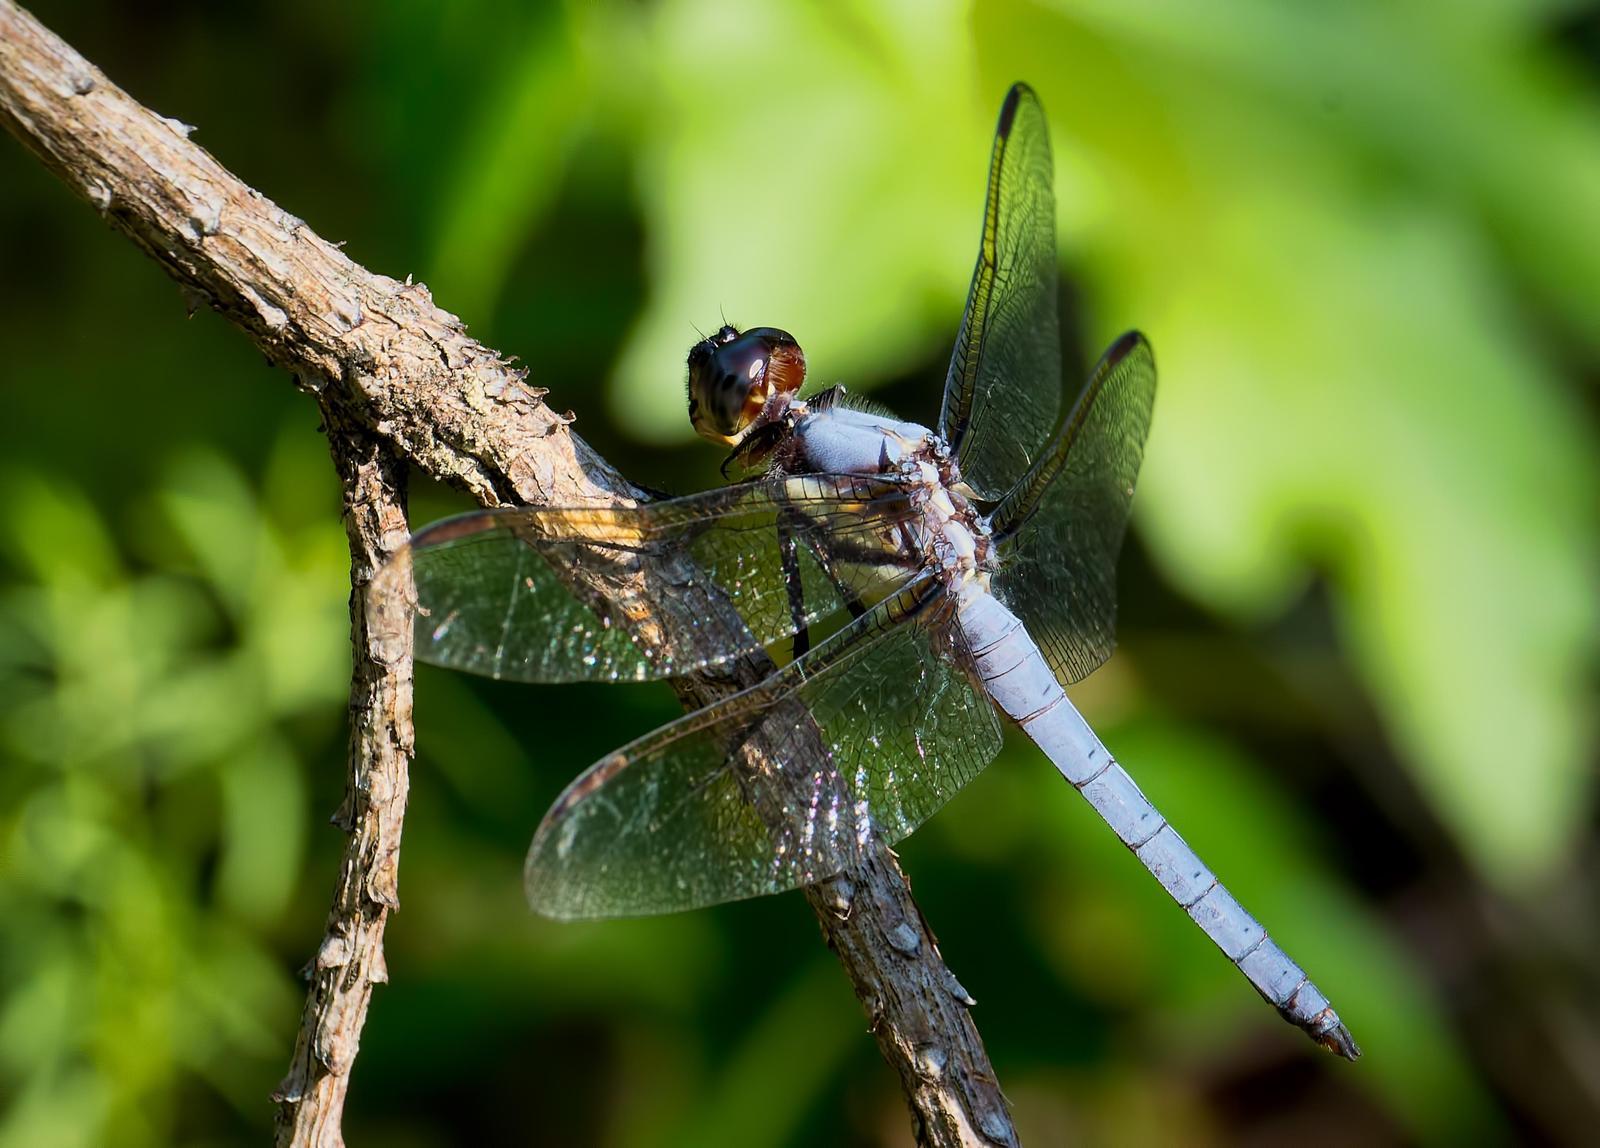 Yellow-sided Skimmer Photo by Michael Moore